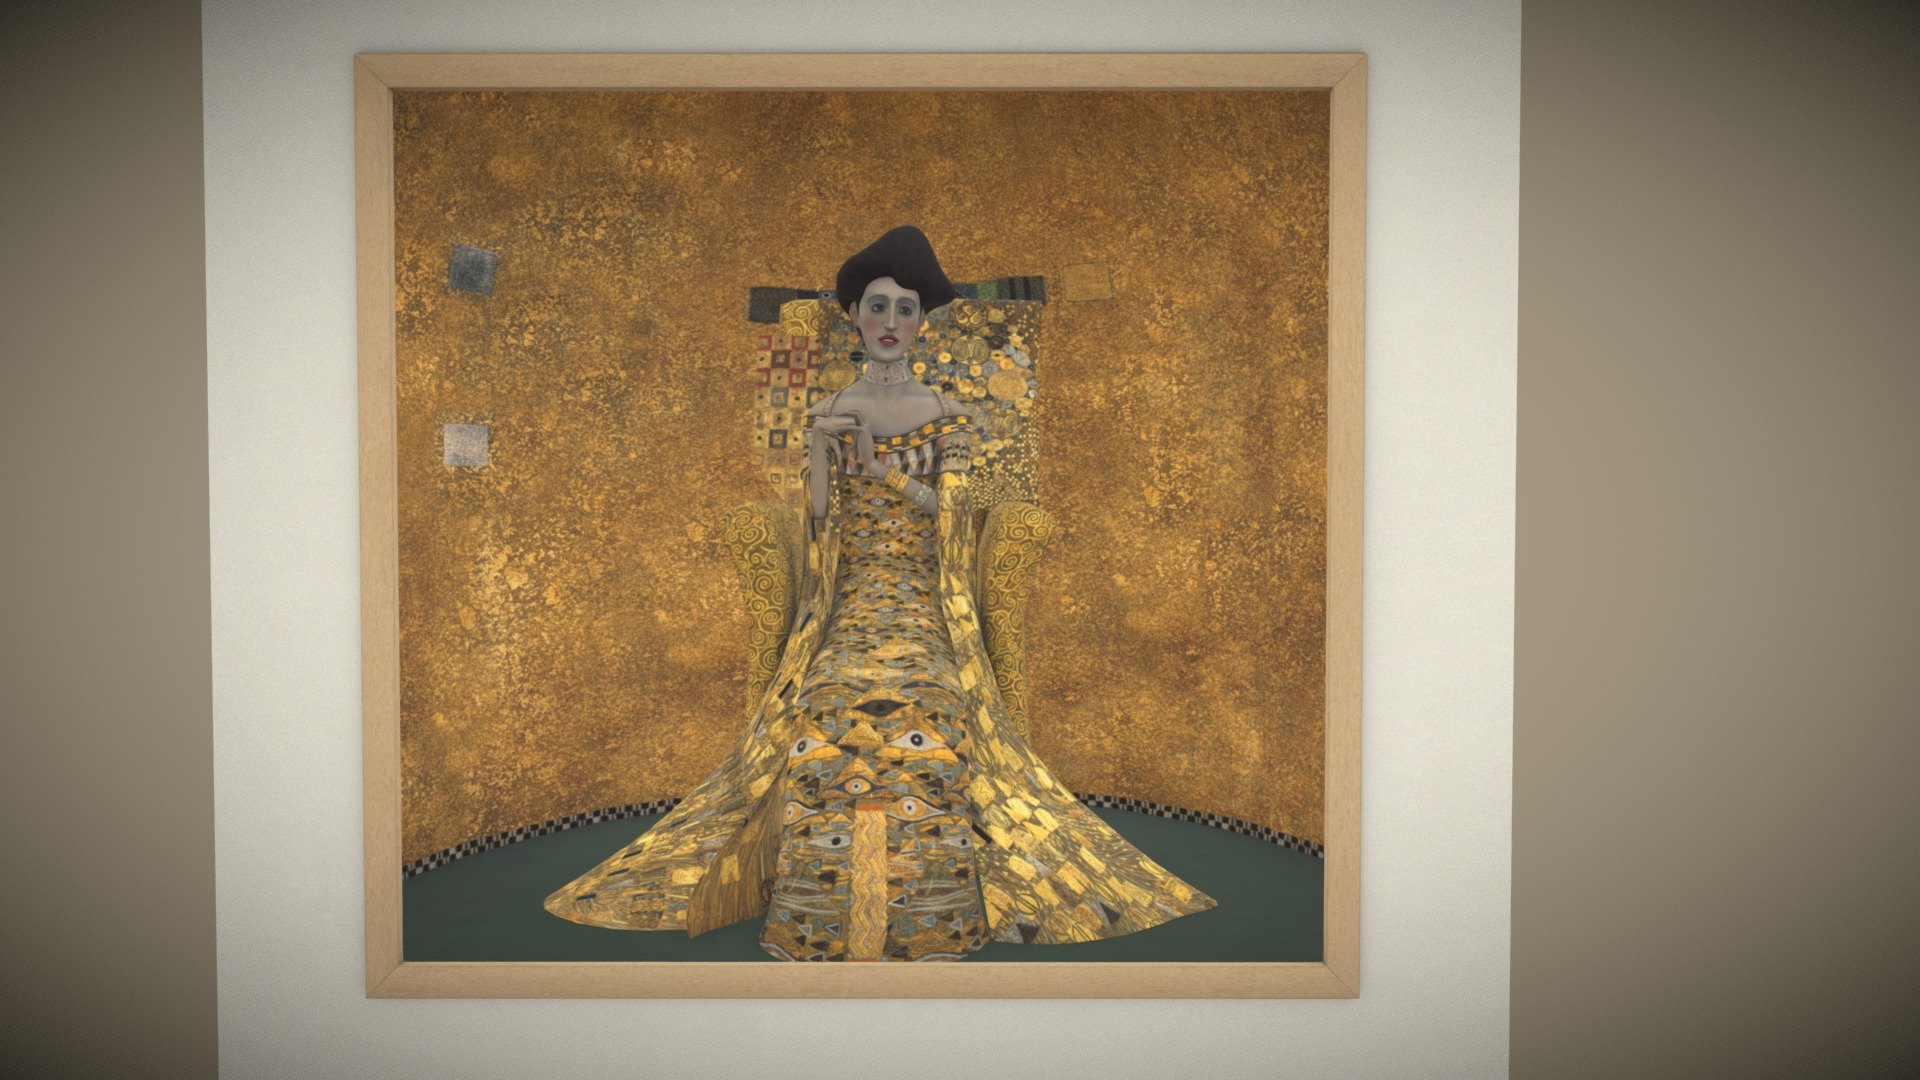 A take on a famous painting by Gustav Klimt depicting &ldquo;The Austrian Mona Lisa